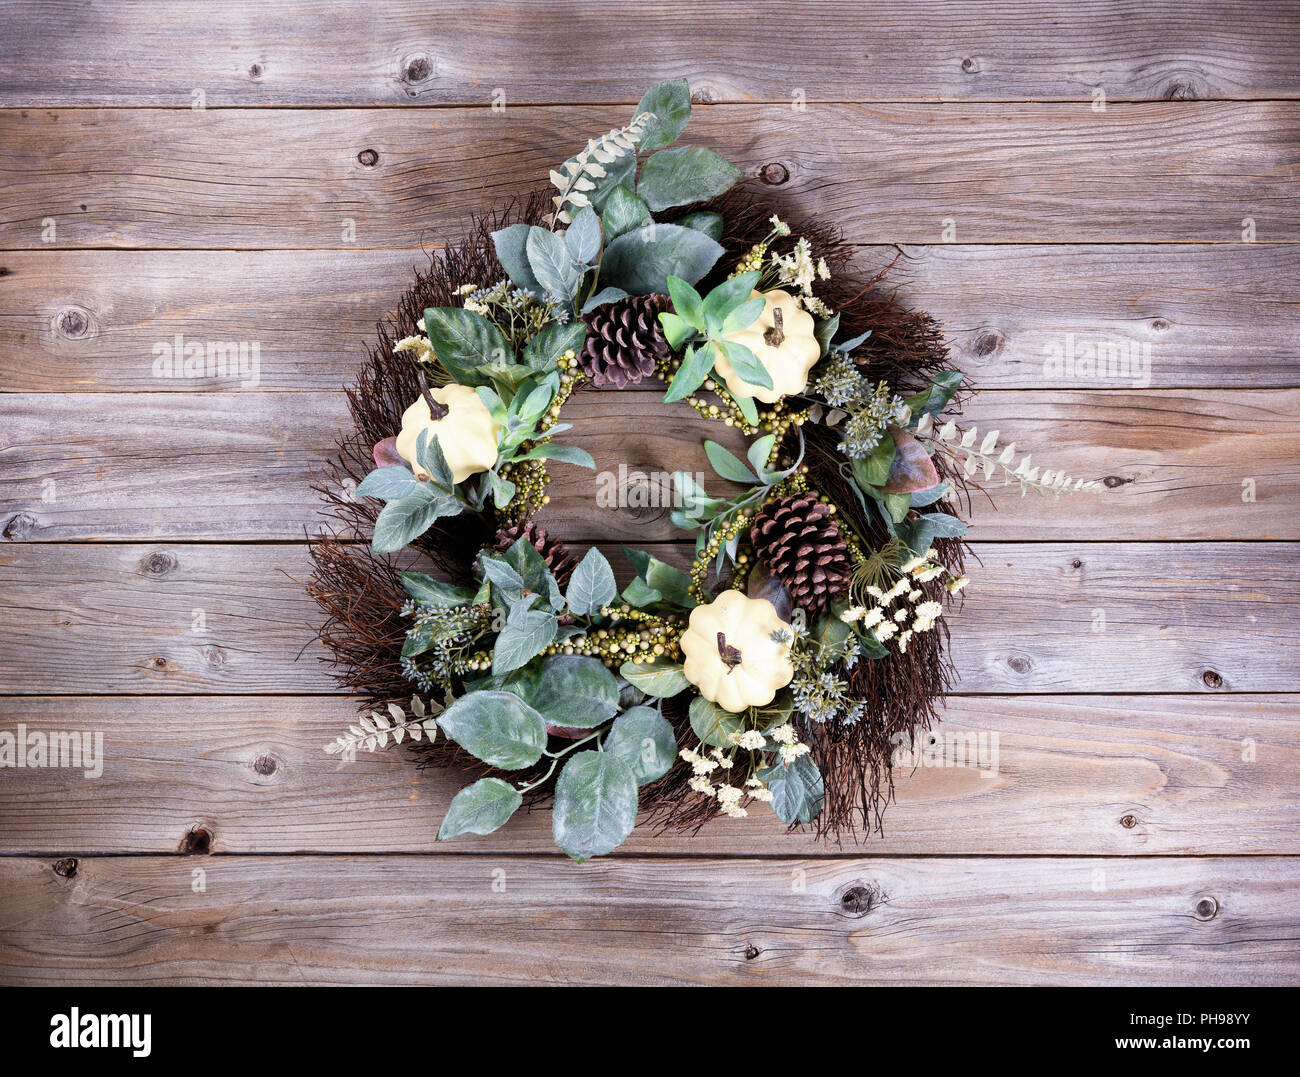 Autumn holiday wreath on rustic wooden boards Stock Photo